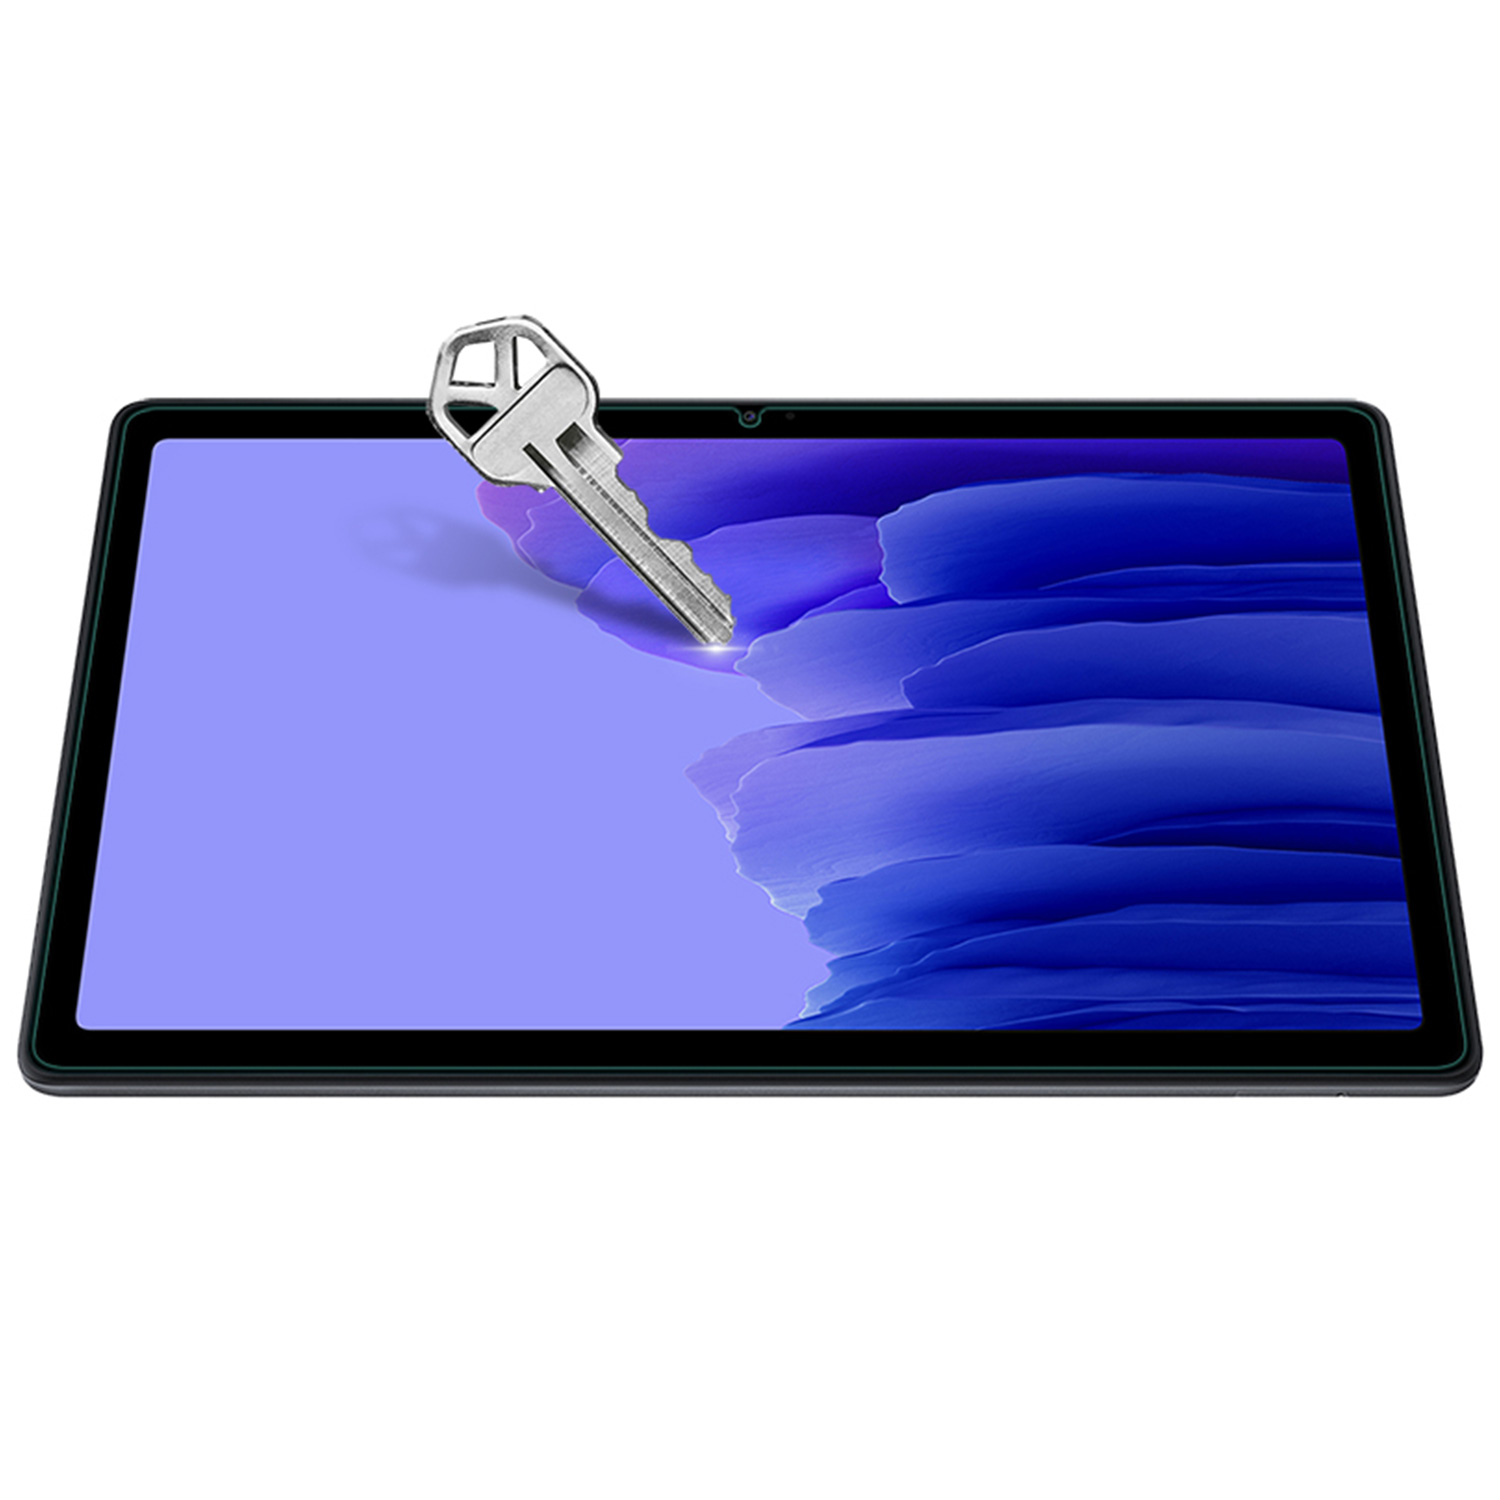 Nillkin Amazing H + Tempered Glass for Samsung Galaxy Tab A7 - Specification: [PG] NILLKIN H + Tempered Glass for Samsung Galaxy Tab A7